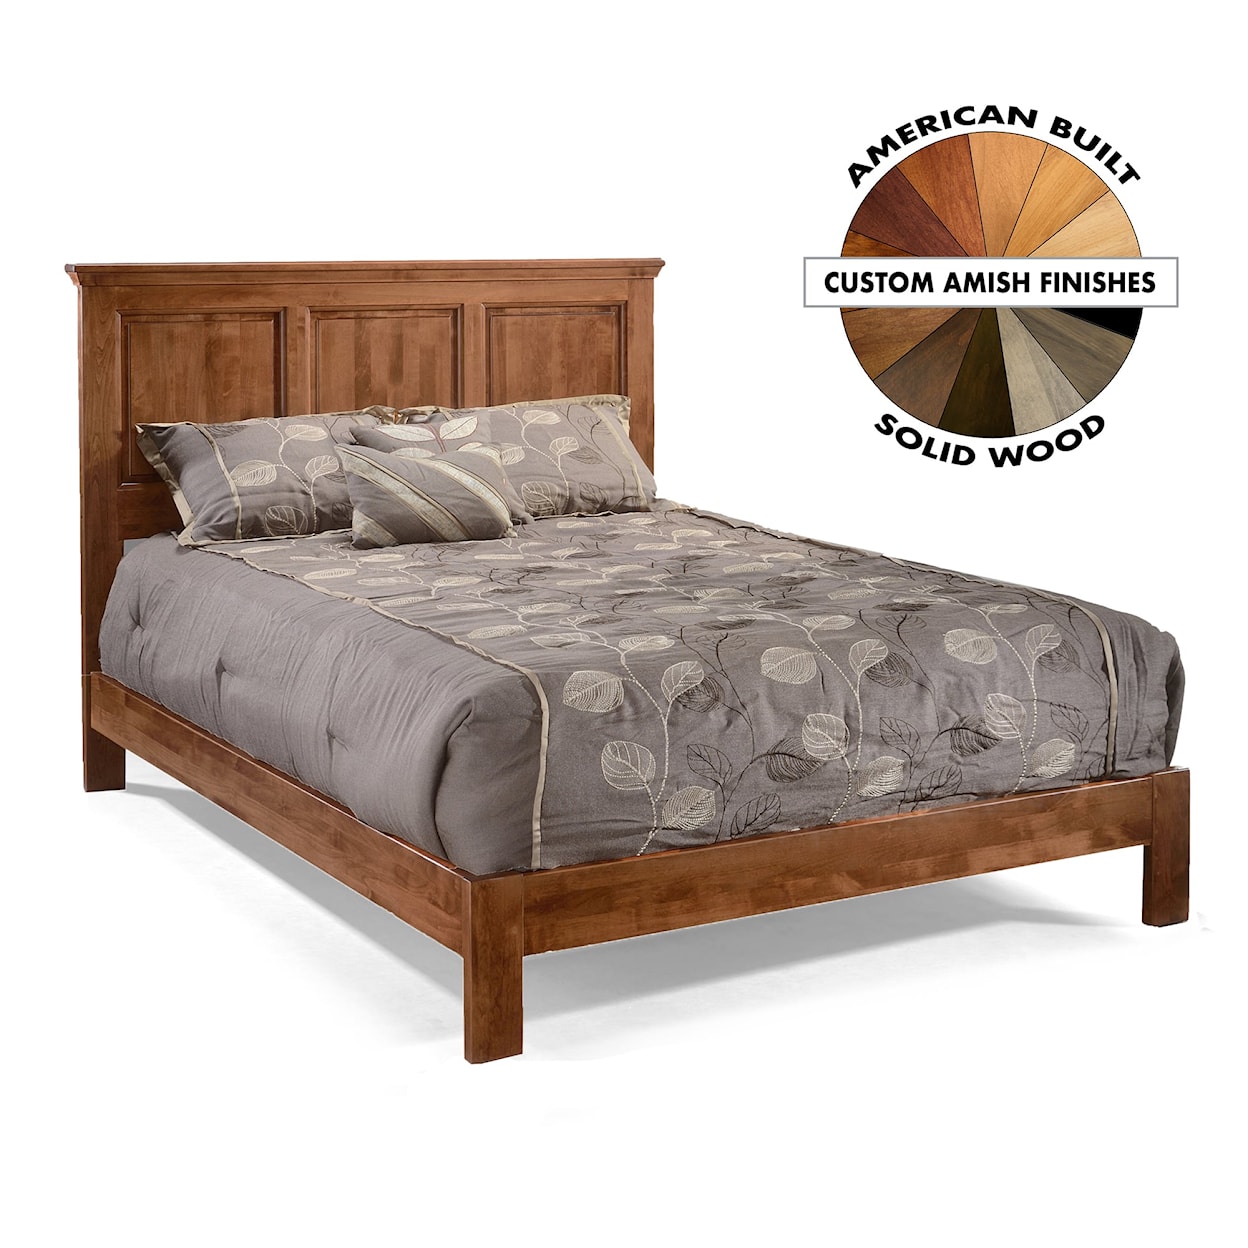 Archbold Furniture Heritage Twin Raised Panel Bed